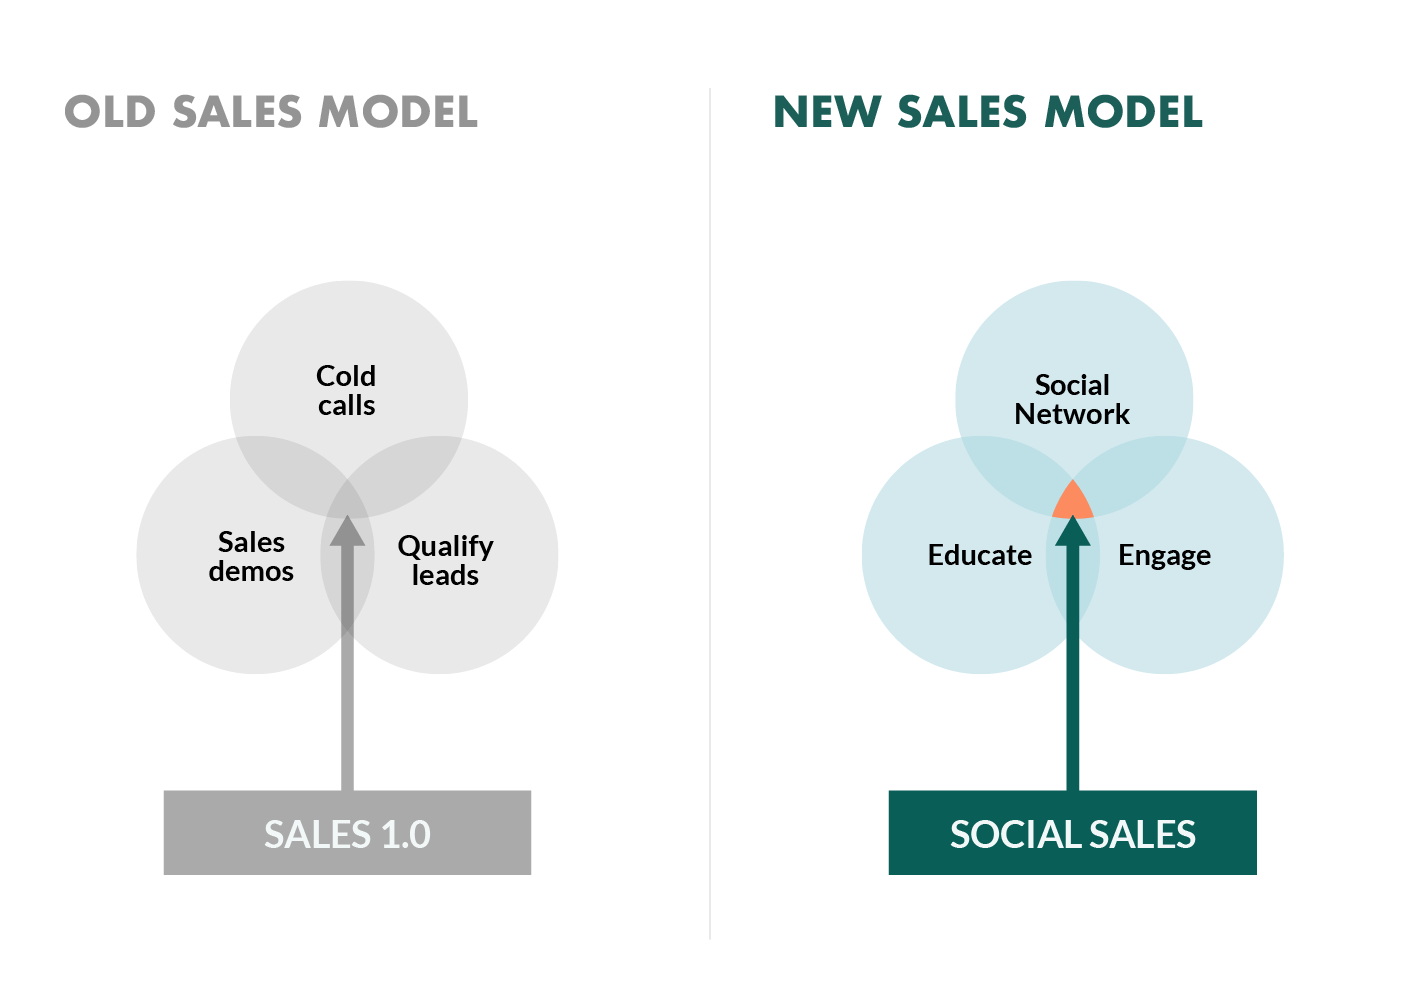 Old Sales Model showing cold calls, qualify leads, sales demos

New Sales Model showing Social network, Educate, Engage